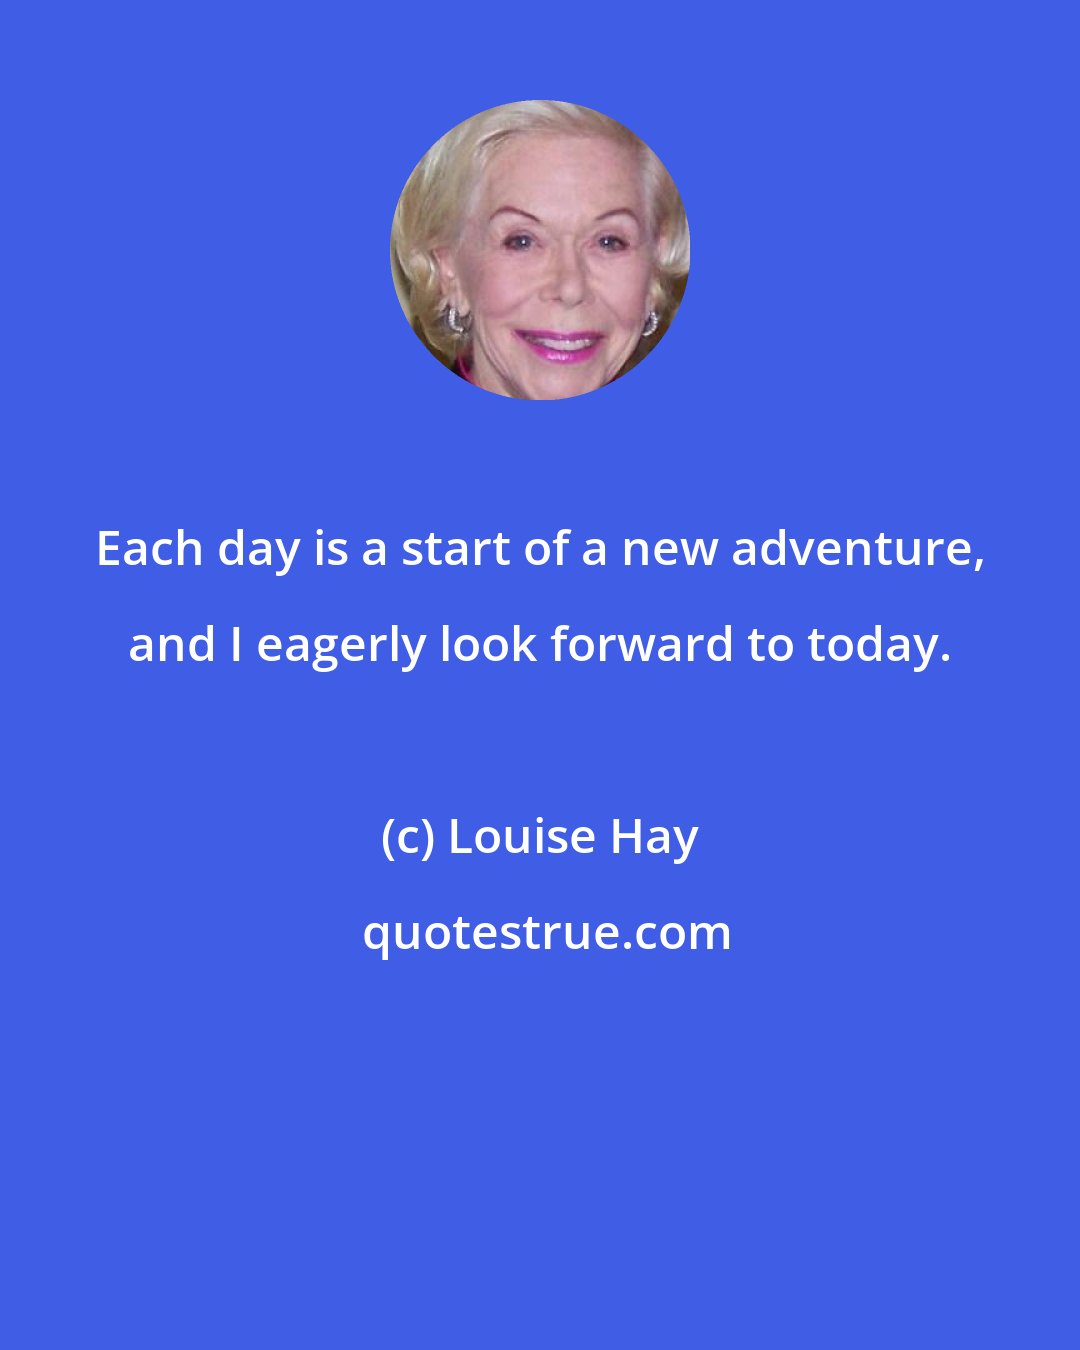 Louise Hay: Each day is a start of a new adventure, and I eagerly look forward to today.